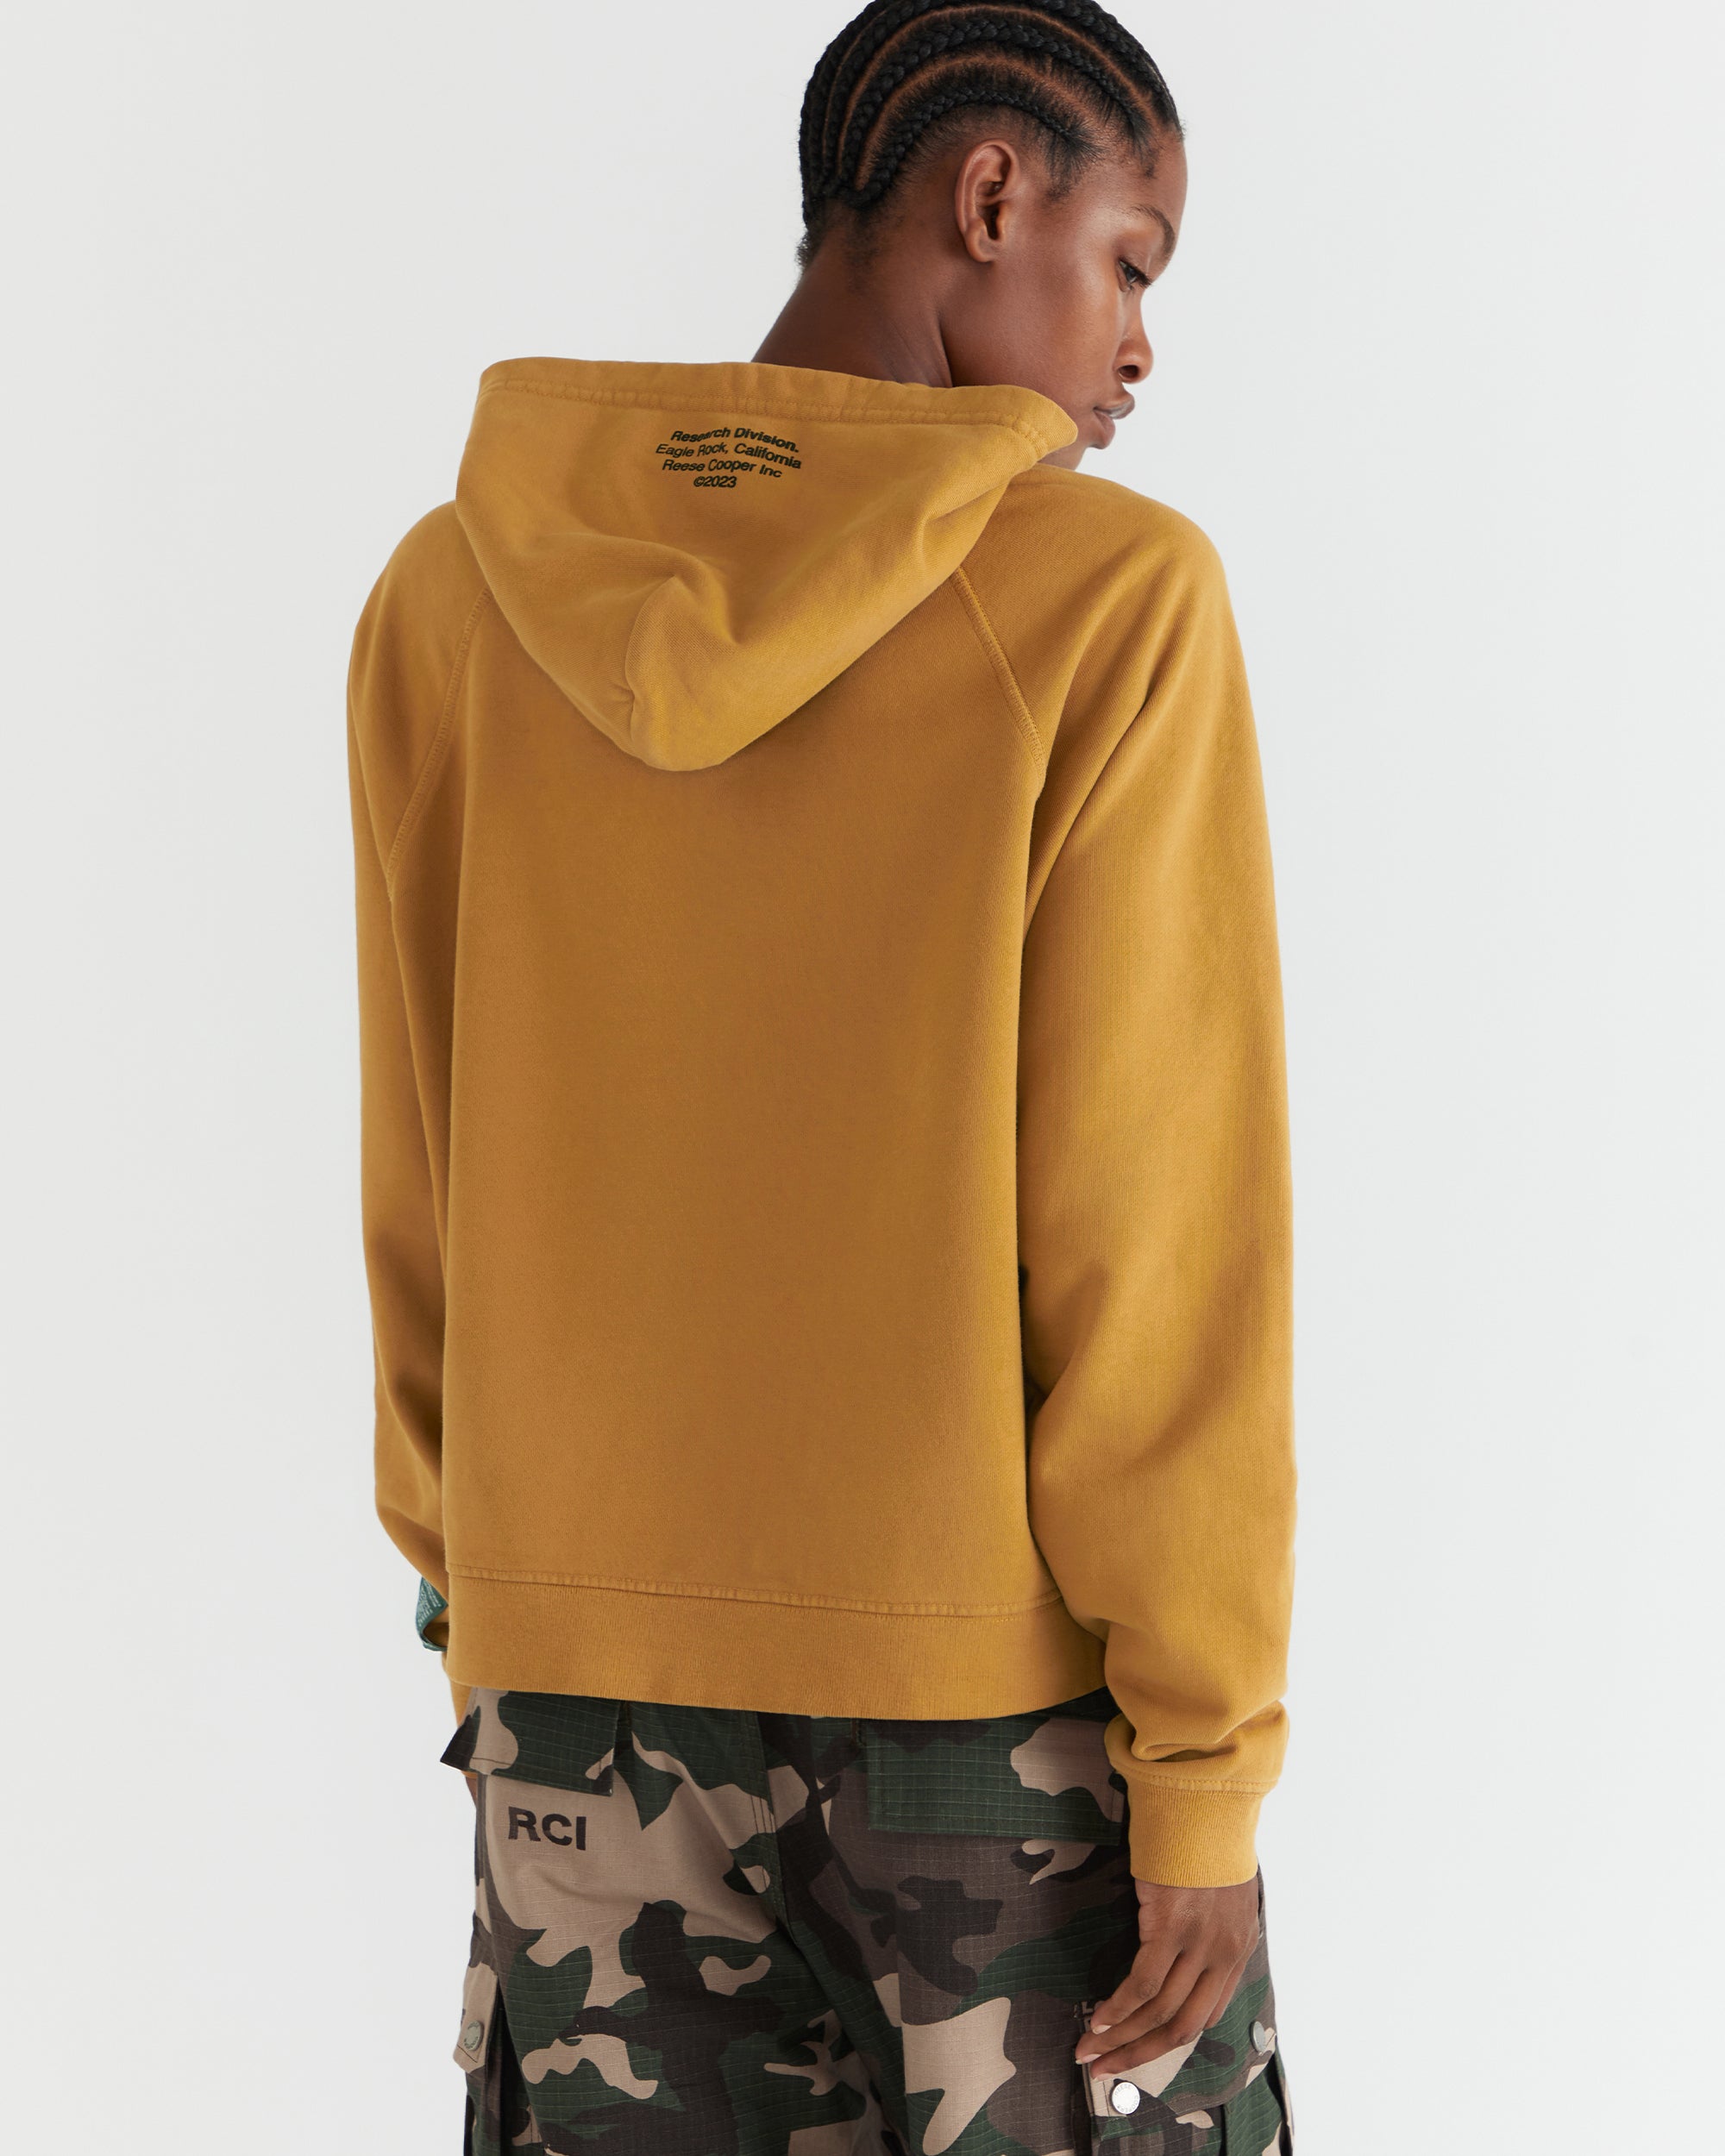 Women - Field Research Division Hooded Sweatshirt - Yellow - 3